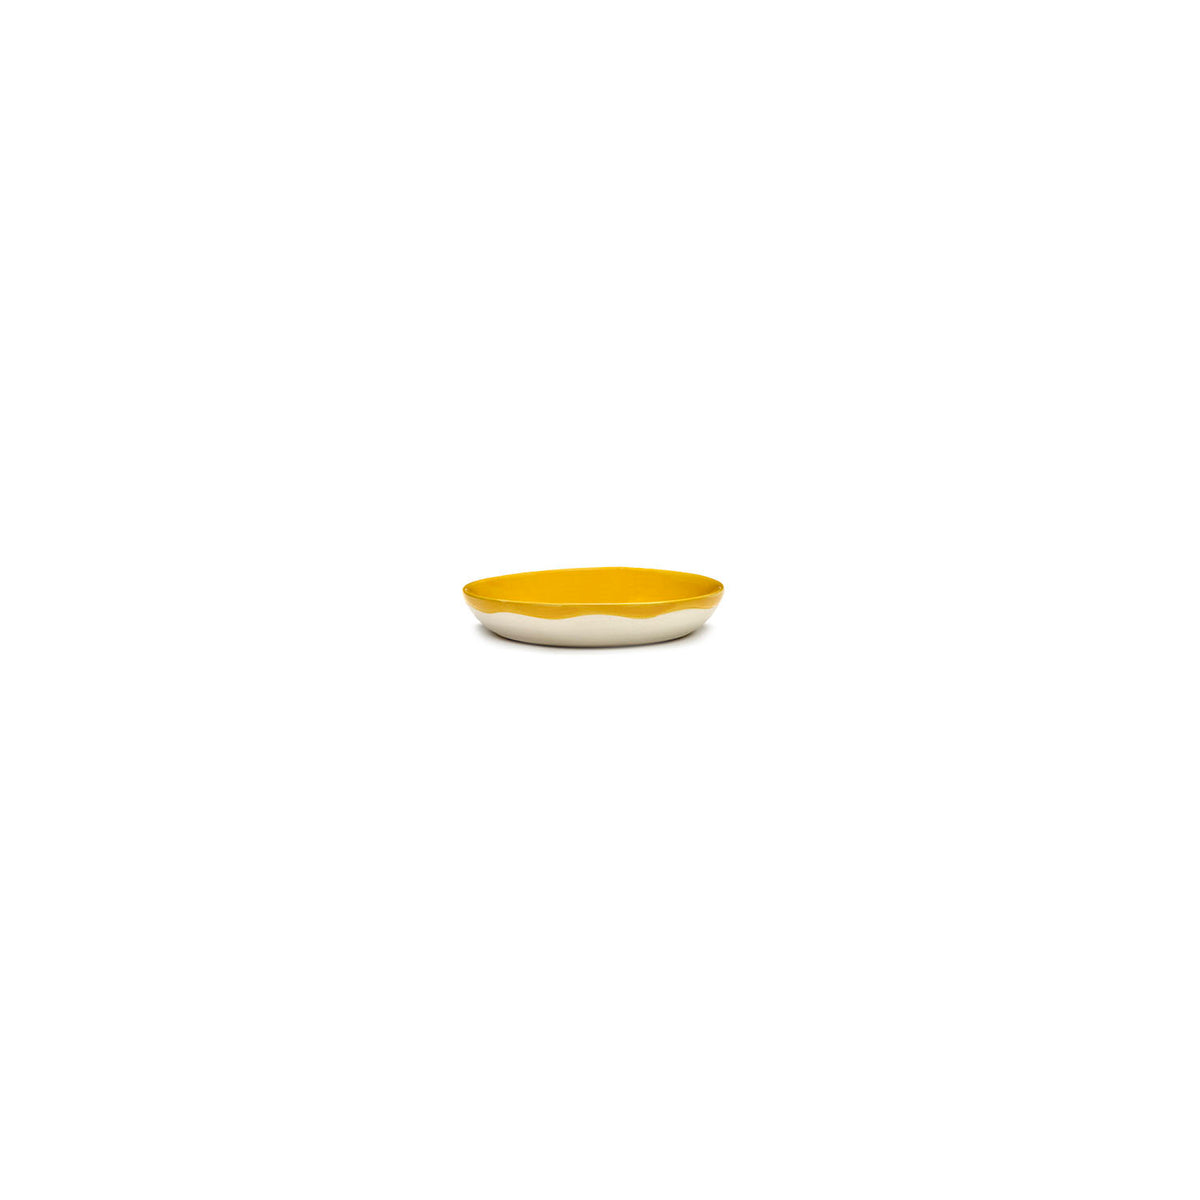 Ottolenghi for Serax Feast collection, side view of small dish, with Sunny Yellow design.